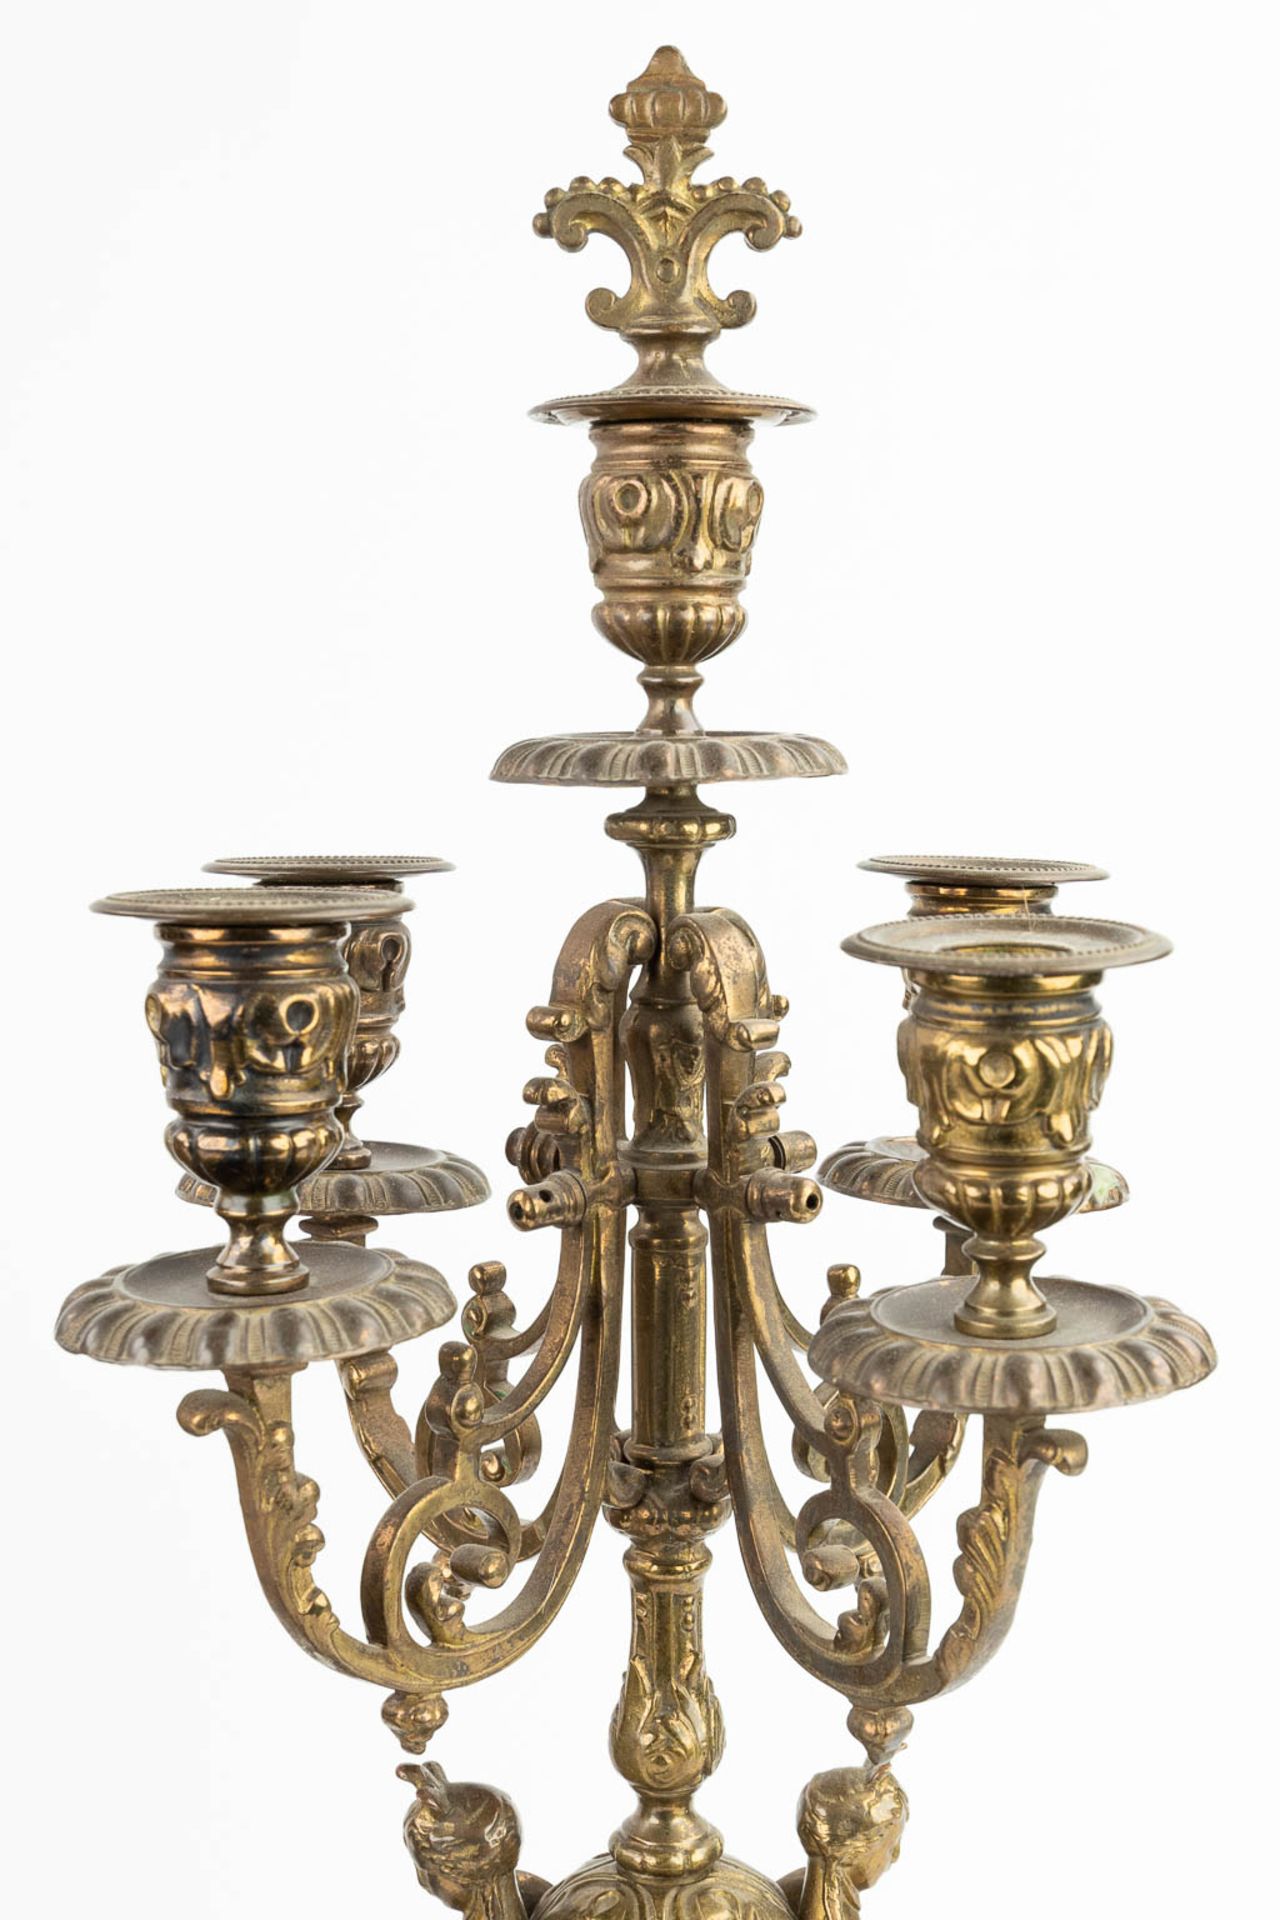 A three-piece mantle garniture clock and candelabra, made of bronze. (20 x 29 x 45cm) - Image 7 of 17